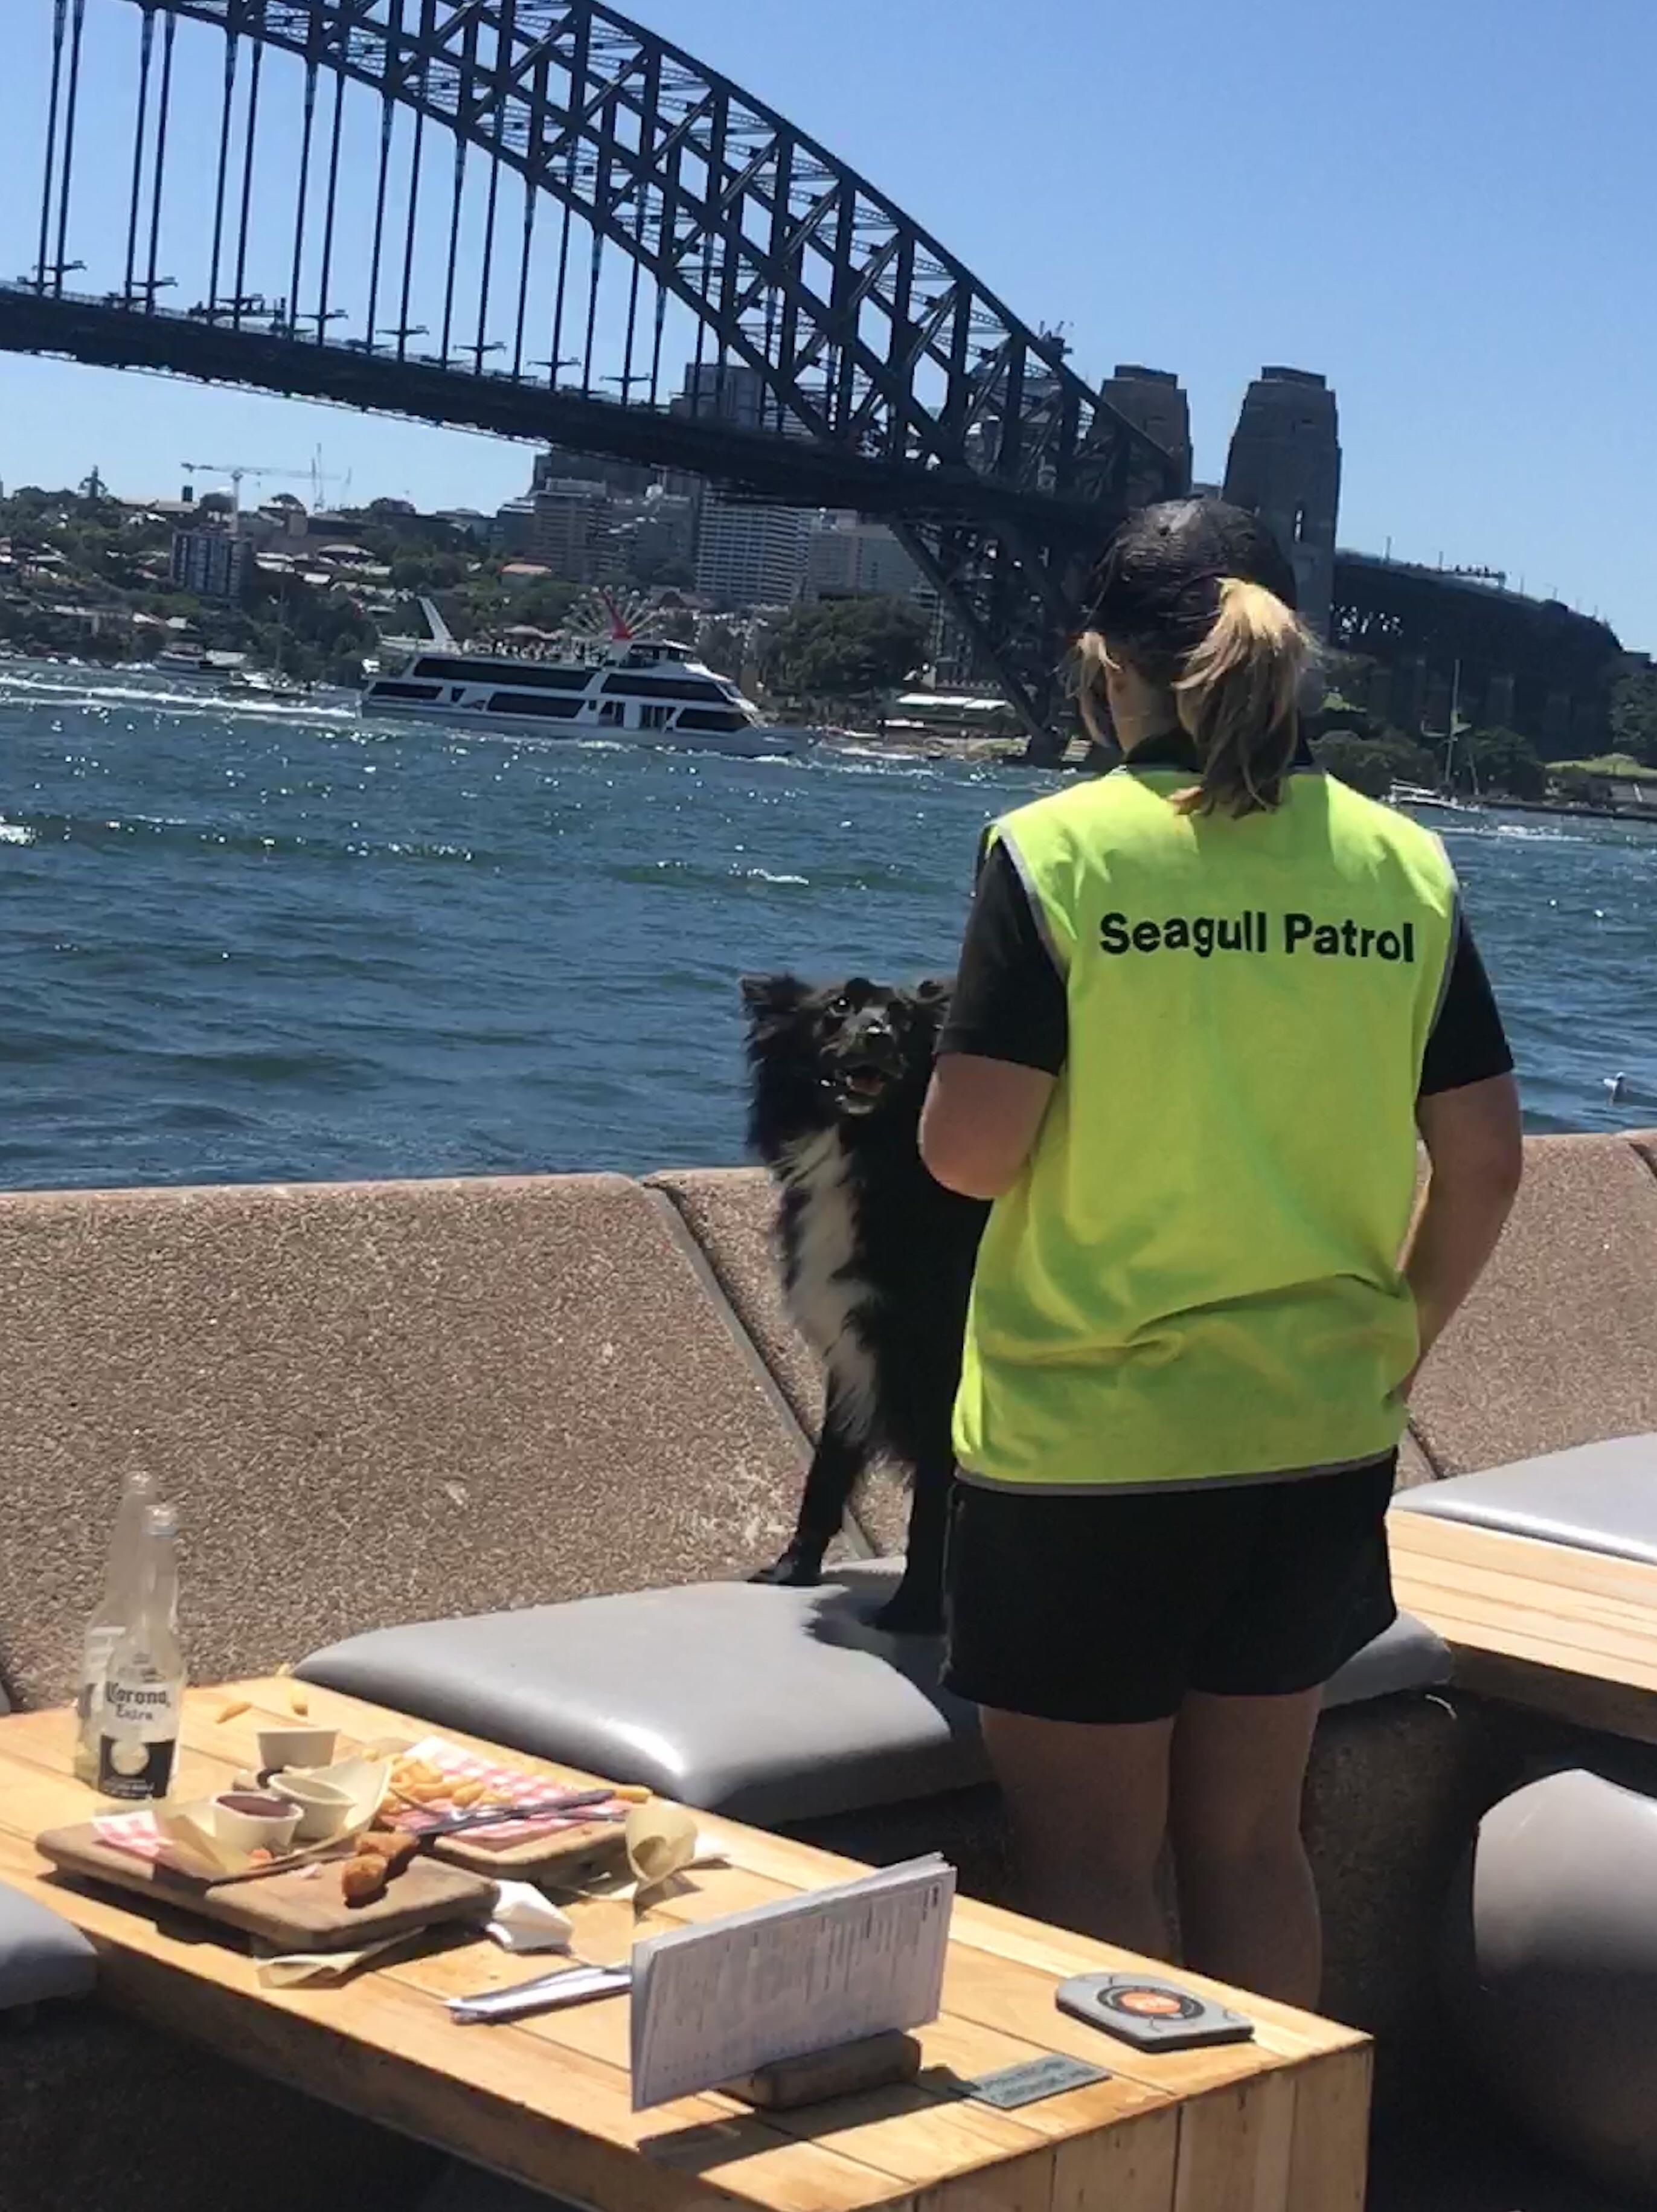 Sydney Harbour has seagull patrol border collie who herds seagulls away from patrons